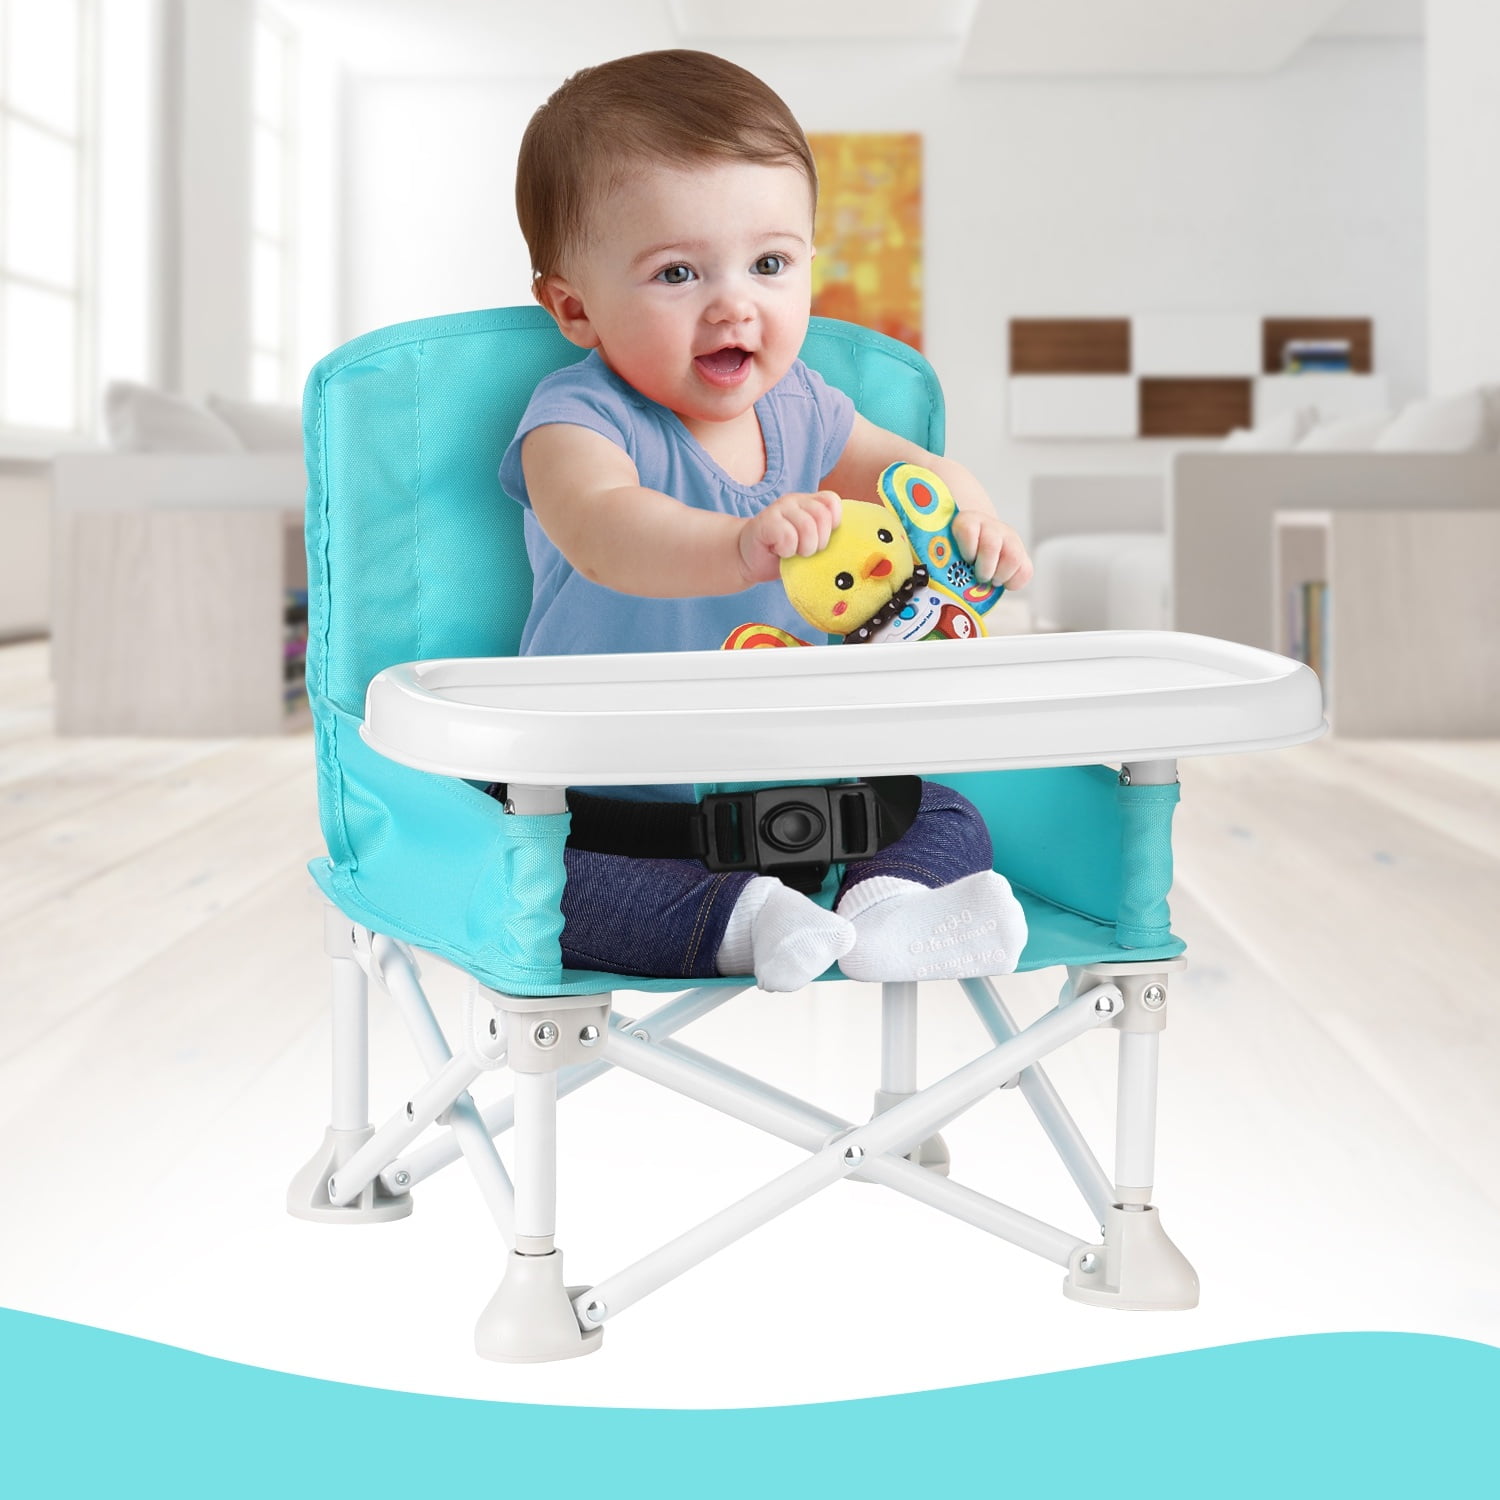 Baby High Chair Seat Folding Adjustable Tray Toddler Child Portable Eating Safe 